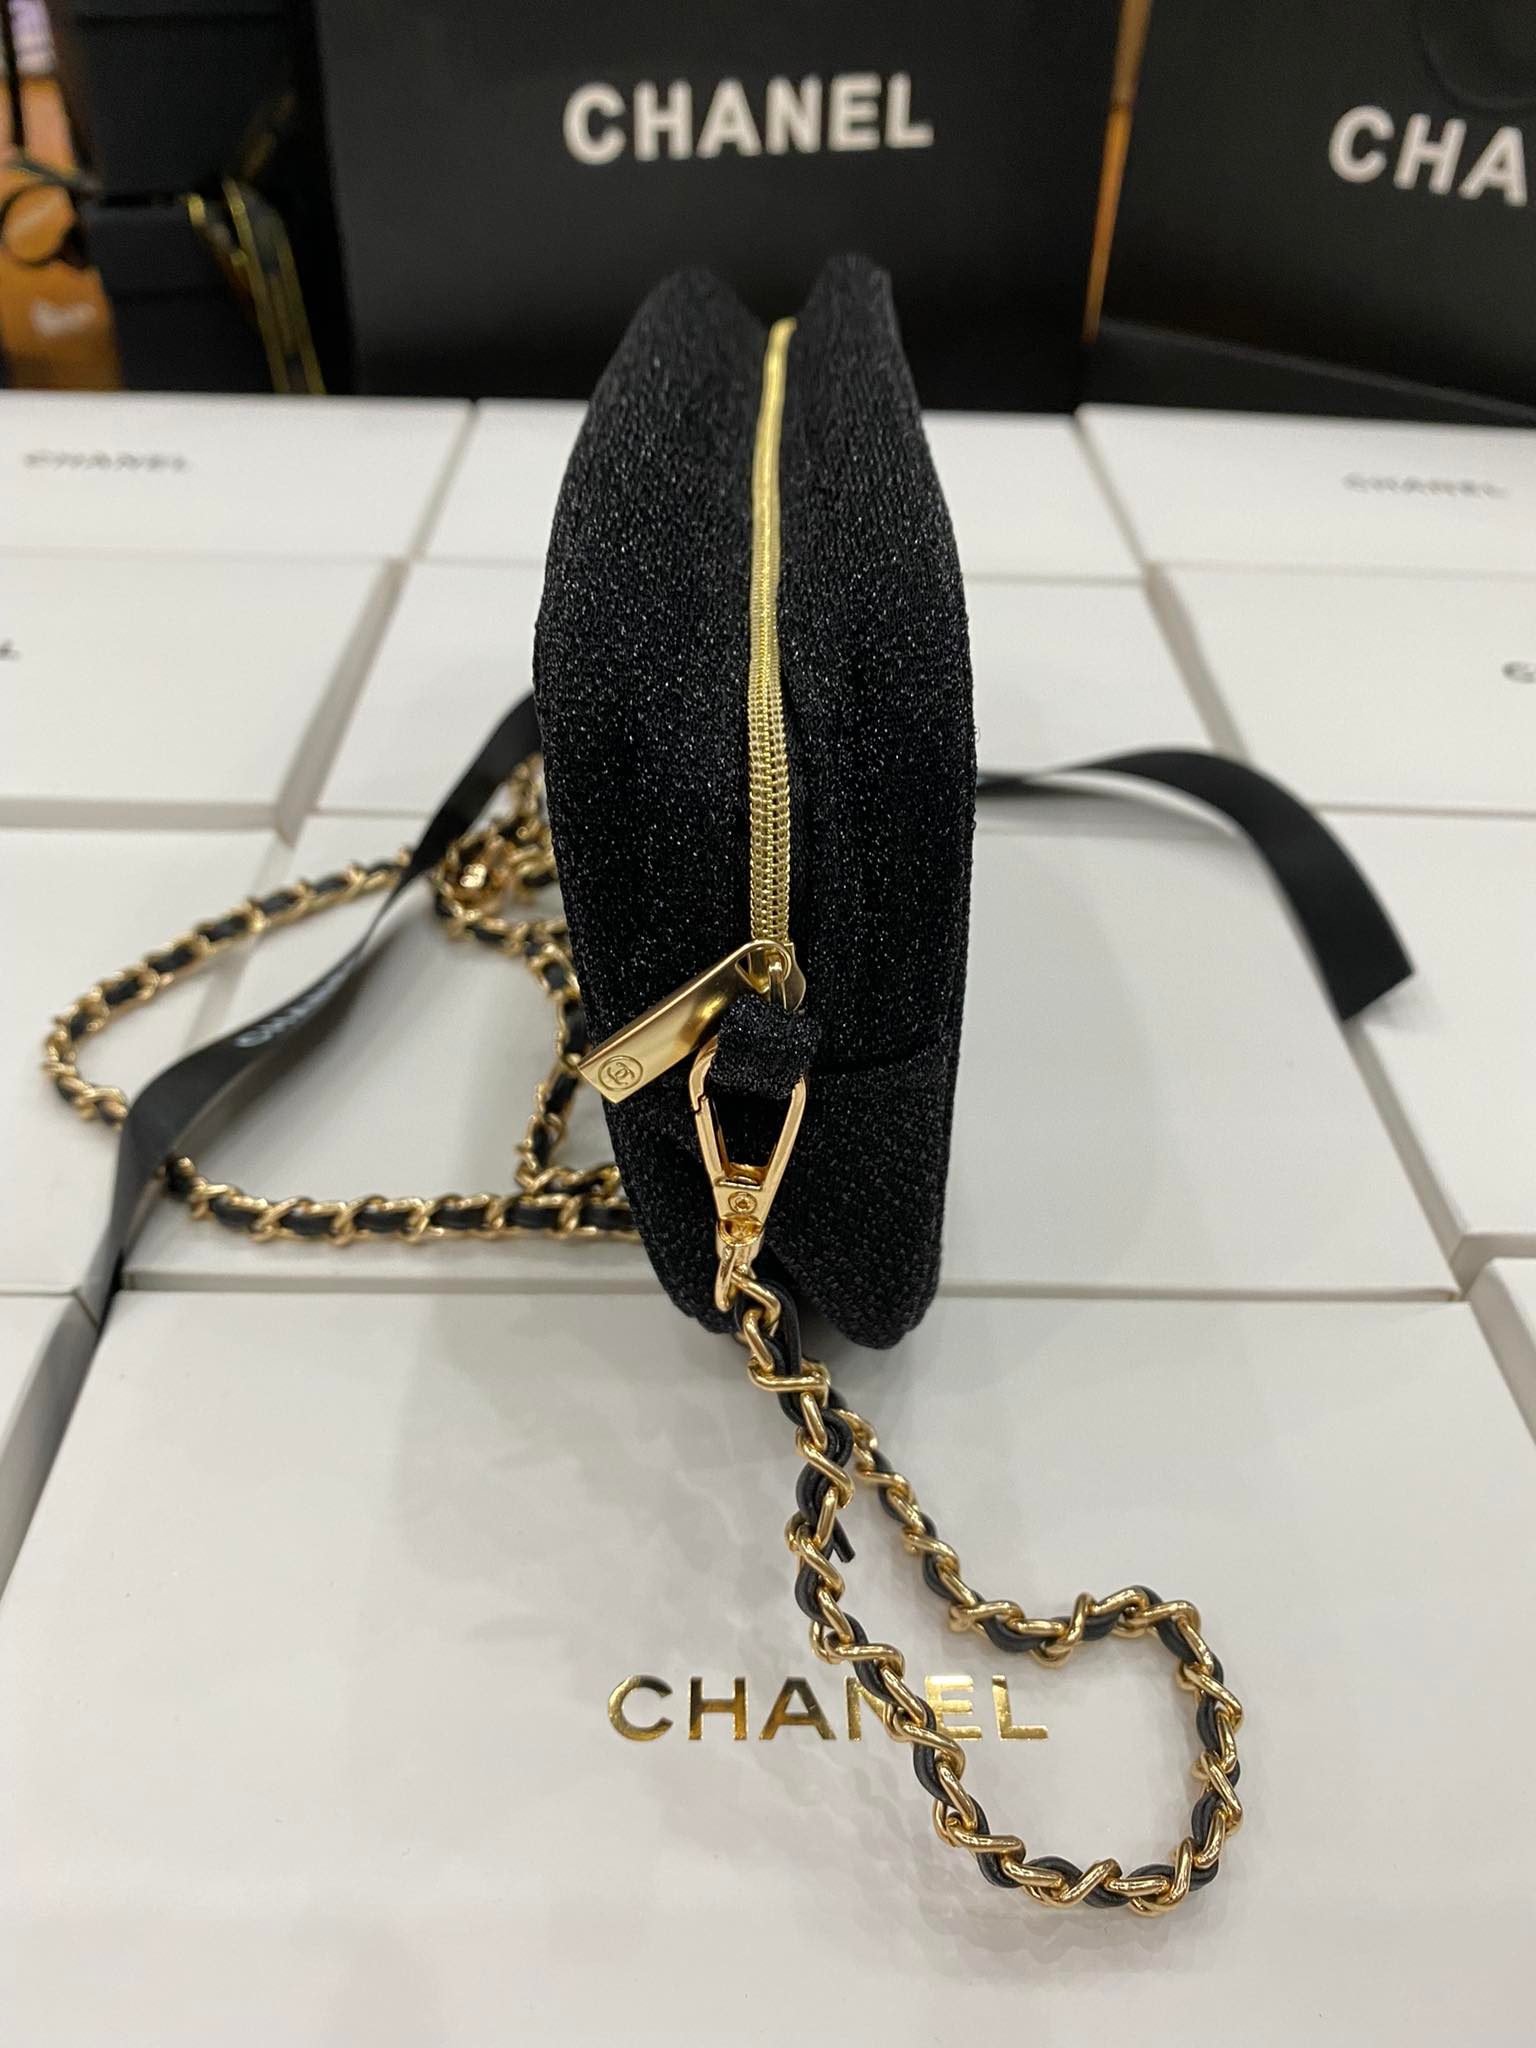 Chanel Gift Bags  Buy Online  My Perfume Shop